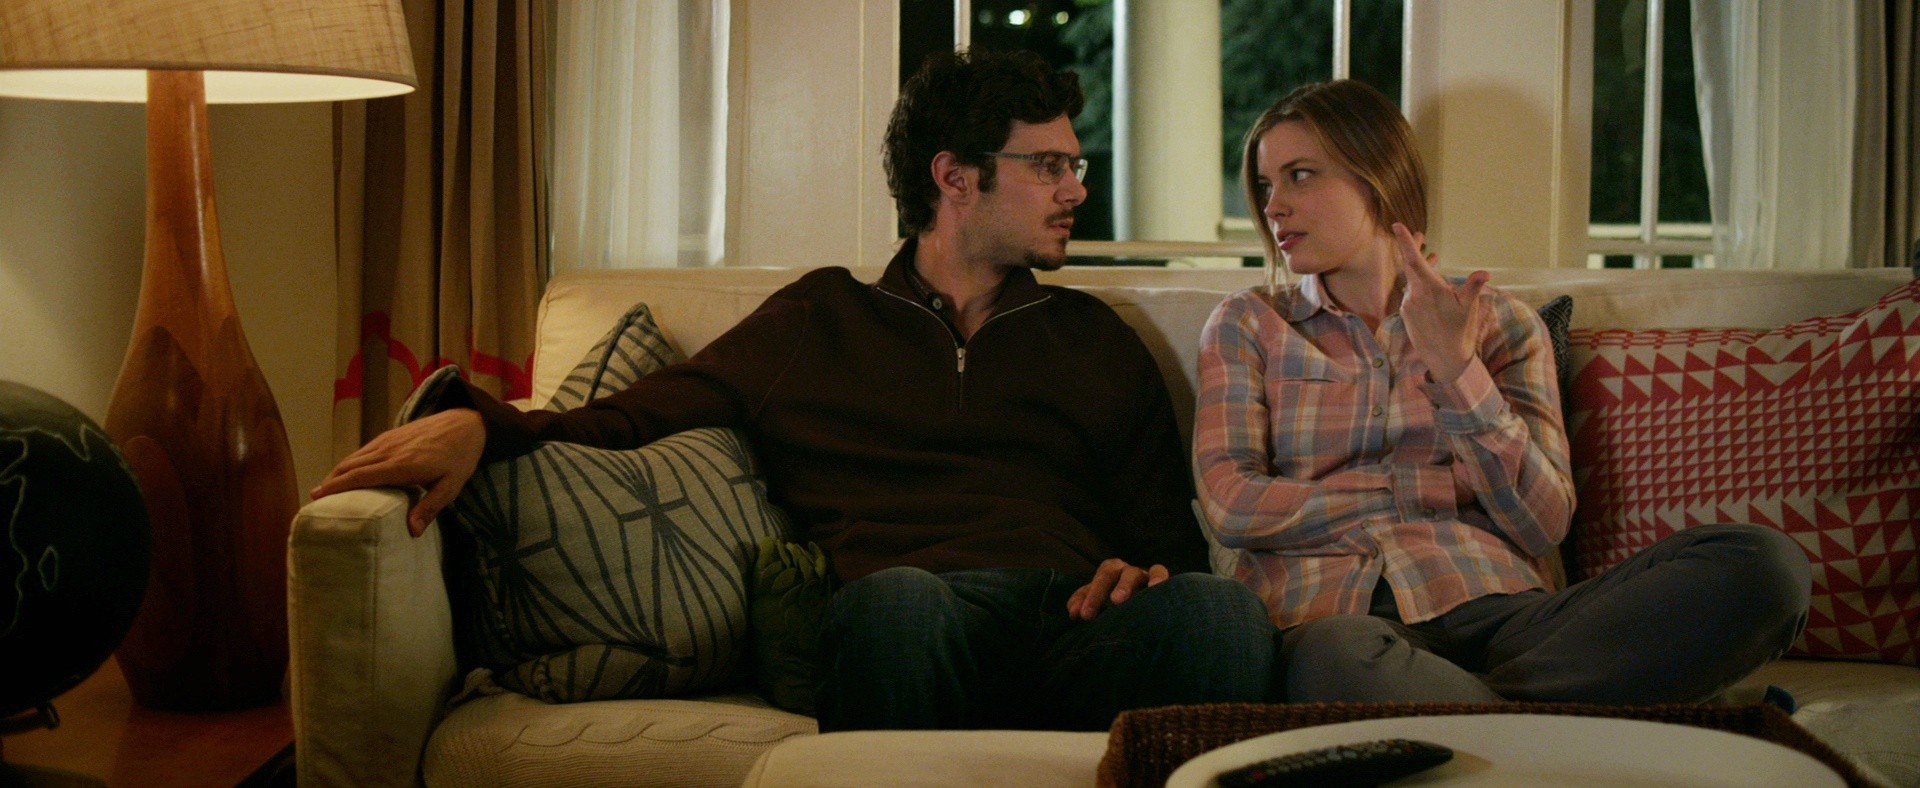 Adam Brody stars as Tim and Gillian Jacobs stars as Paige in Magnolia Pictures' Life Partners (2014)